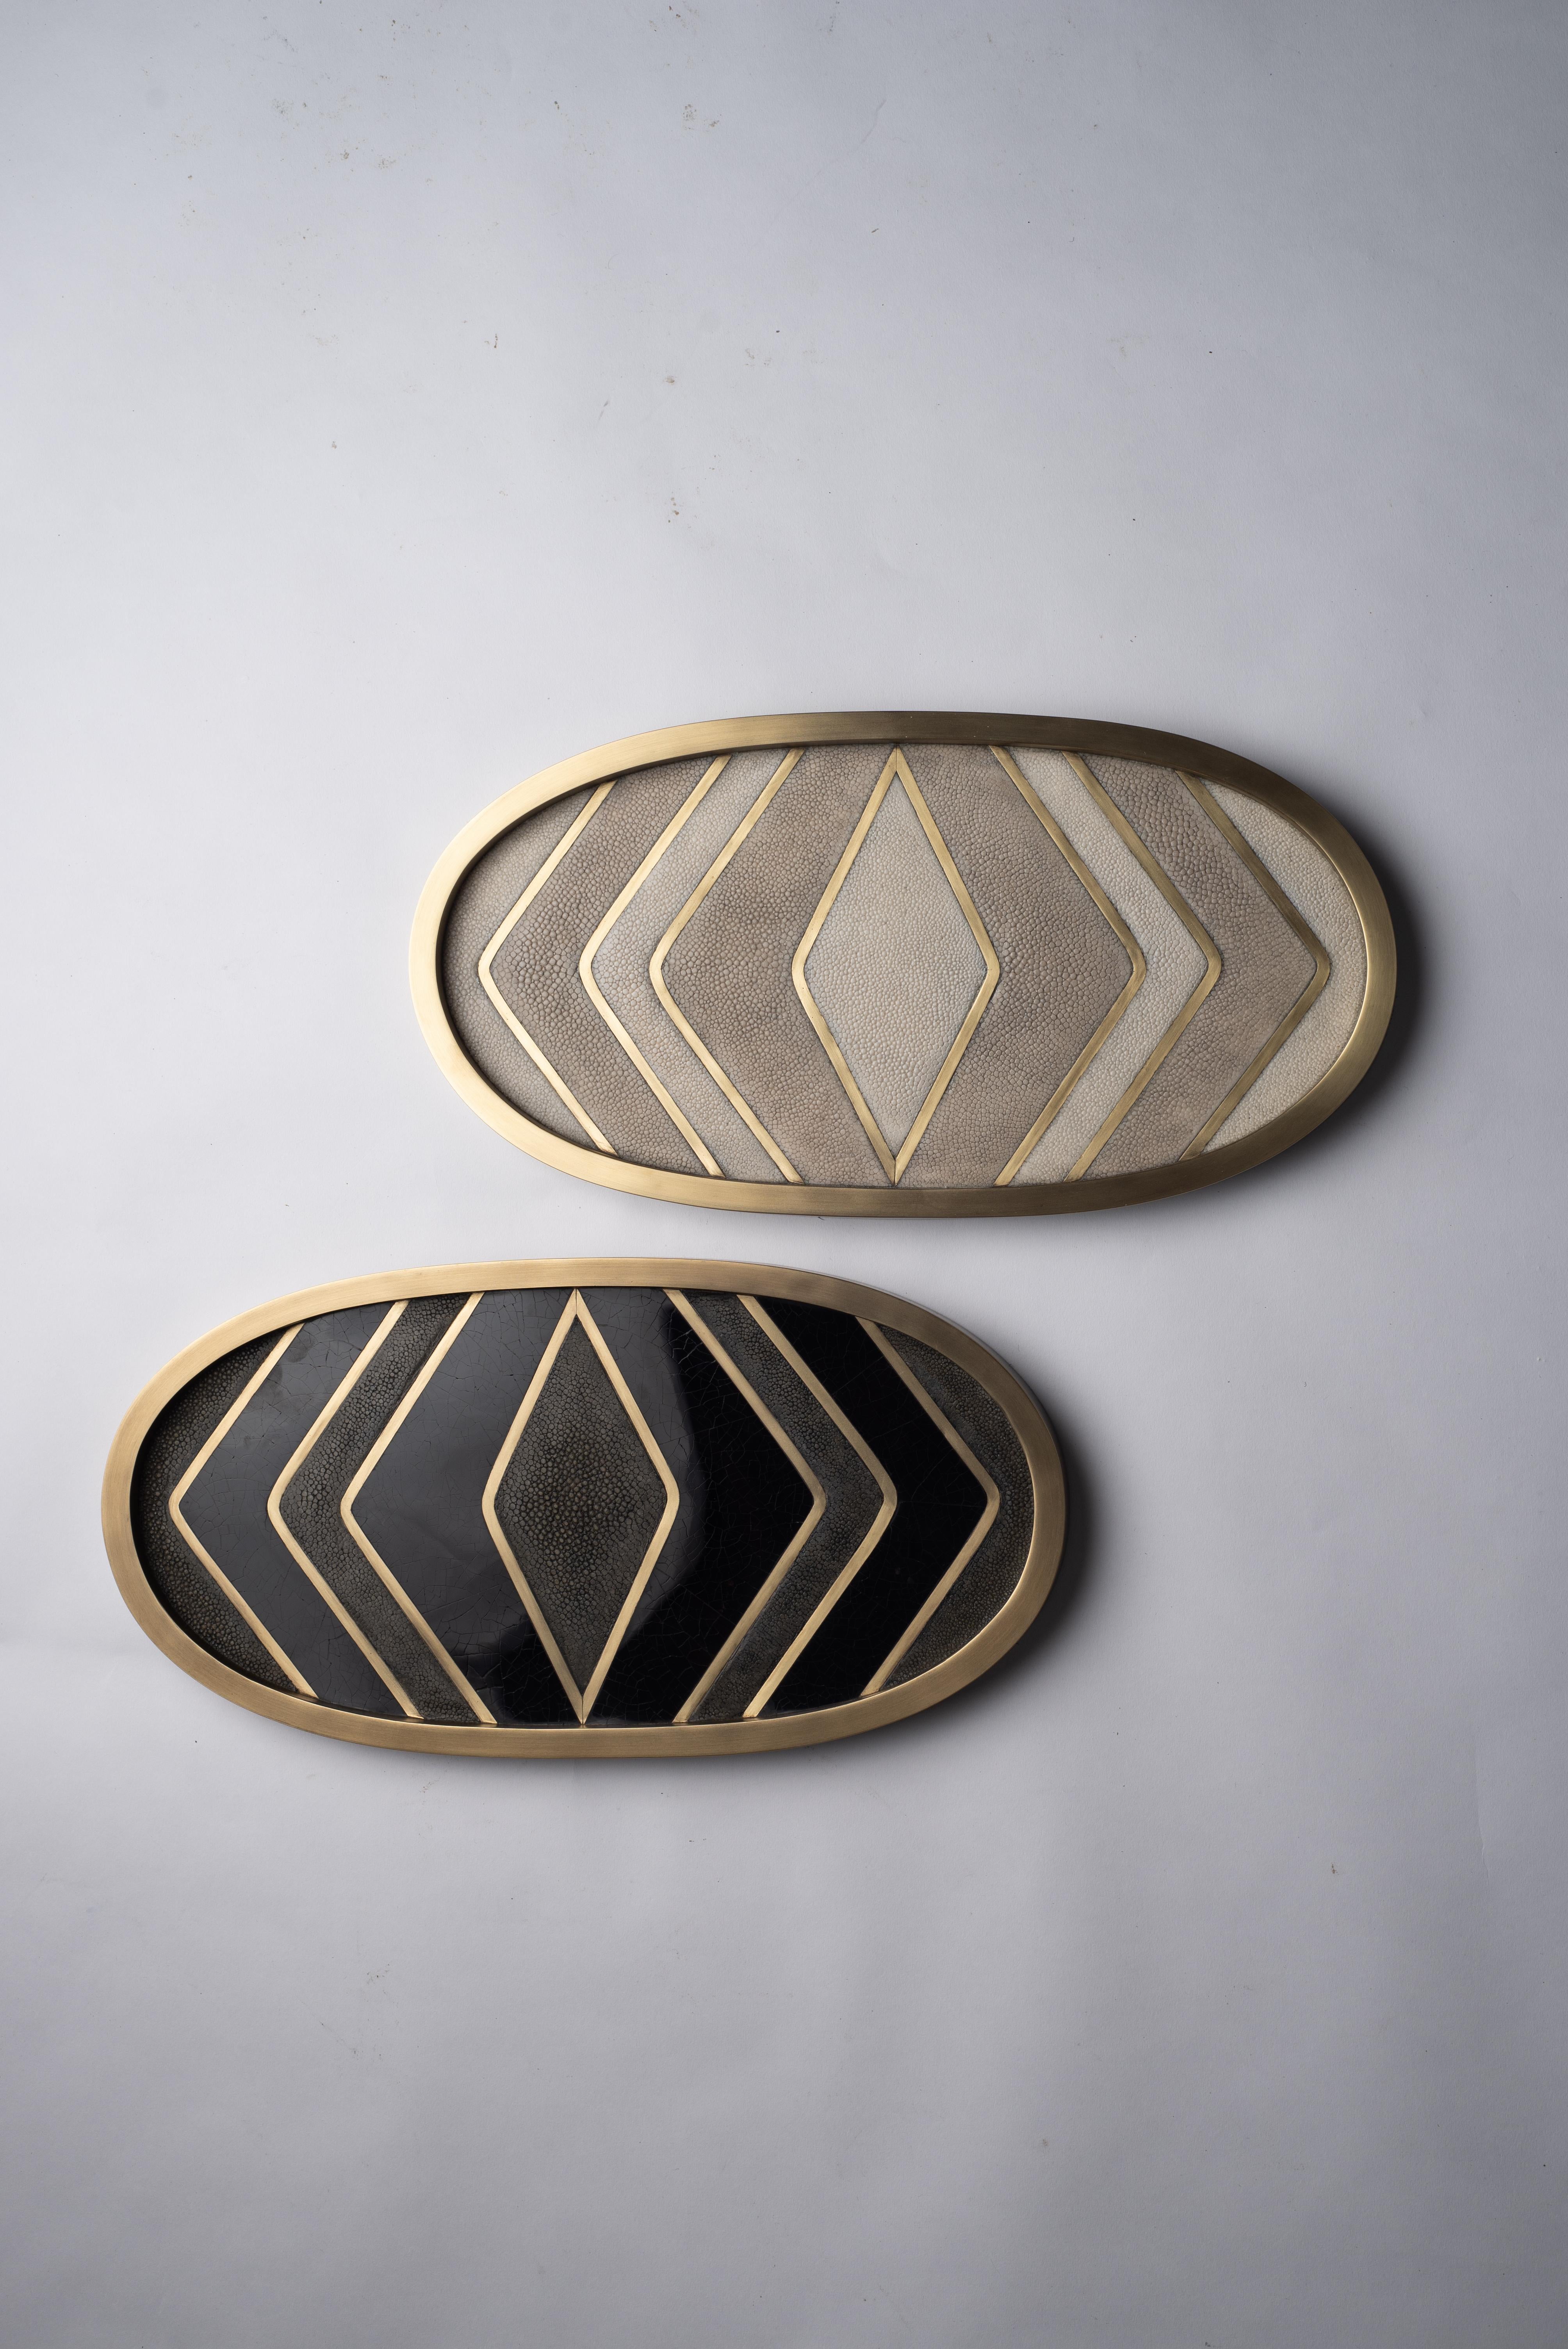 Hand-Crafted Oval Tray in Cream Shagreen and Brass by Kifu, Paris